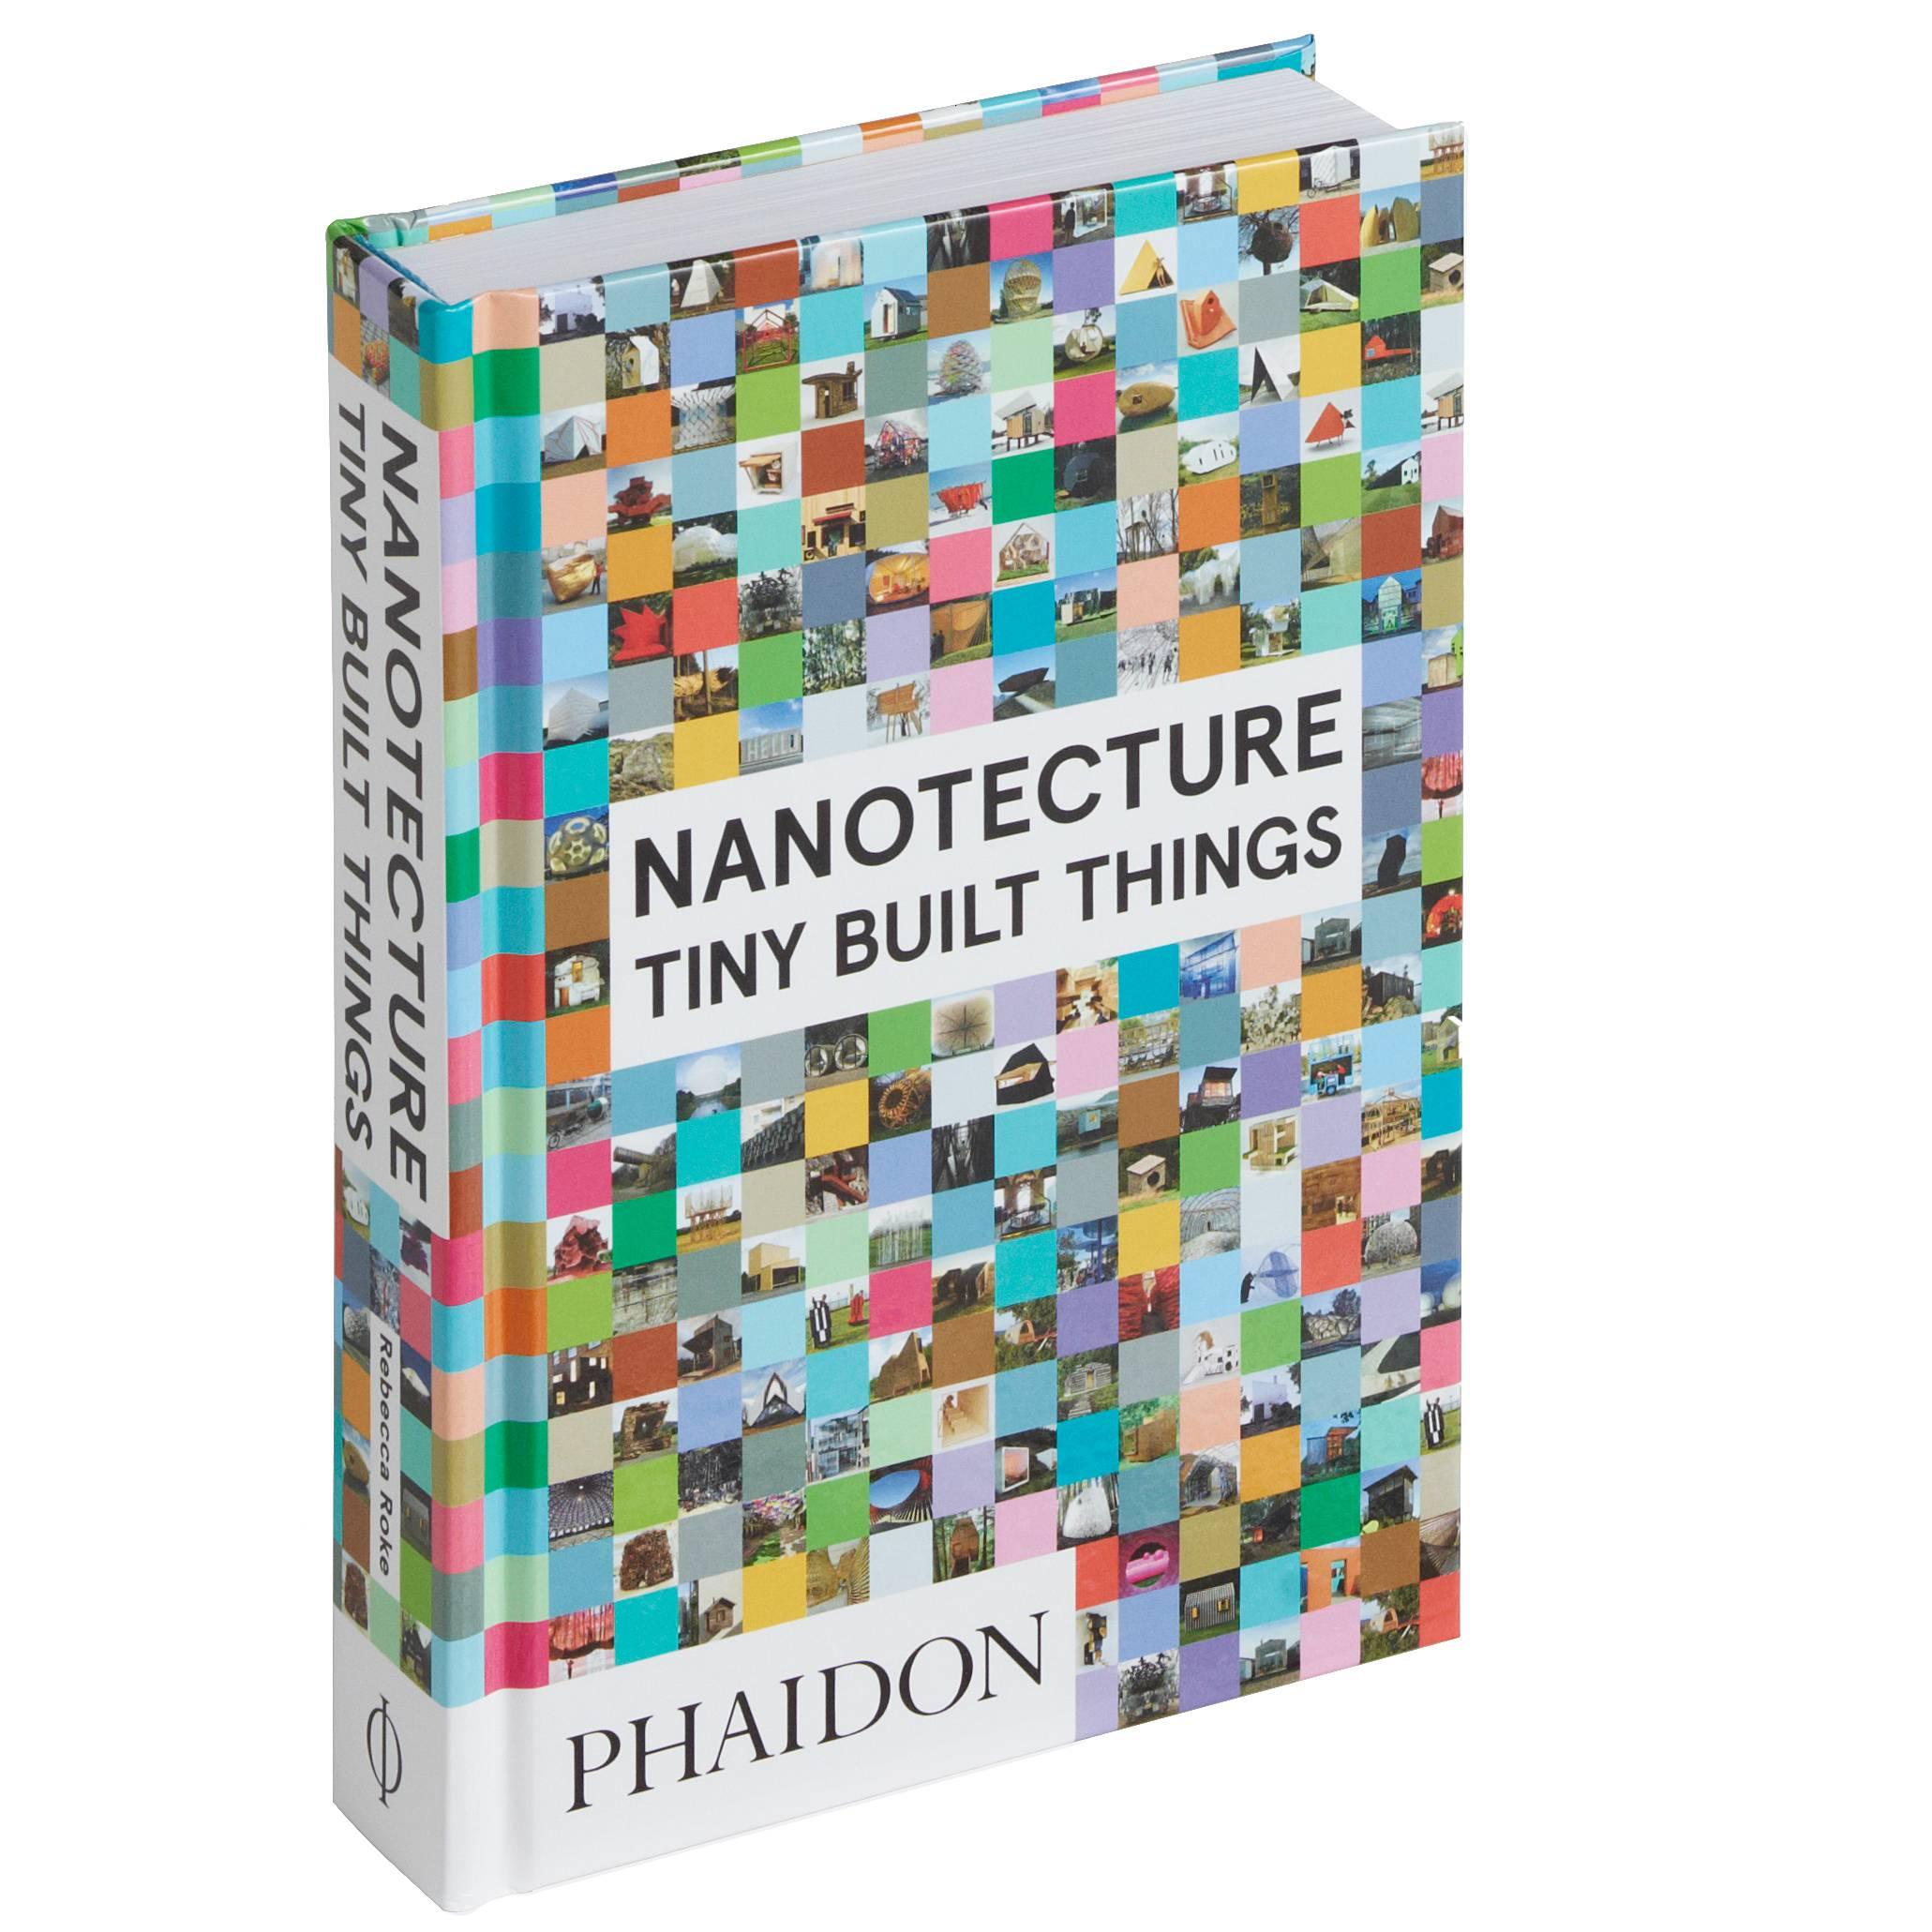 Nanotecture: Tiny Built Things Book